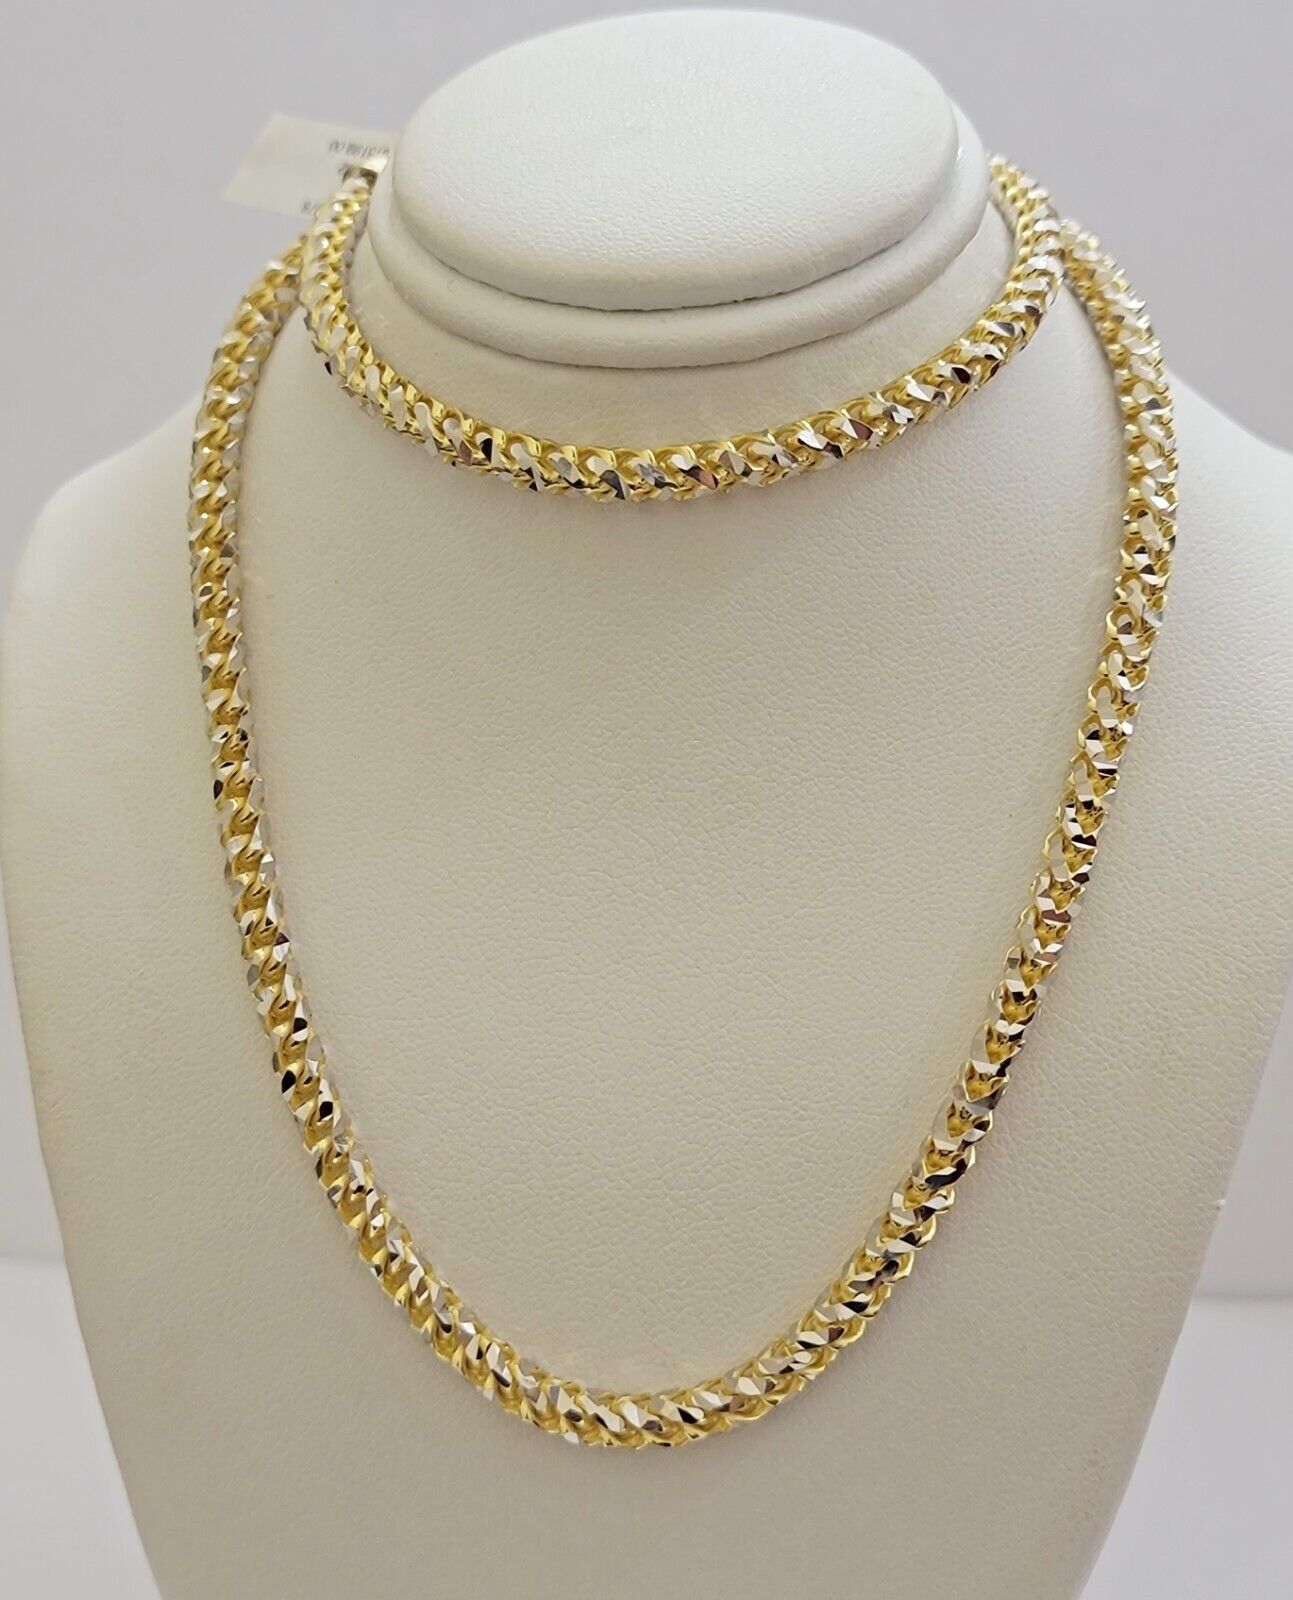 Solid 10k Gold Palm Chain Tennis Necklace Diamond cuts 4.5mm 22